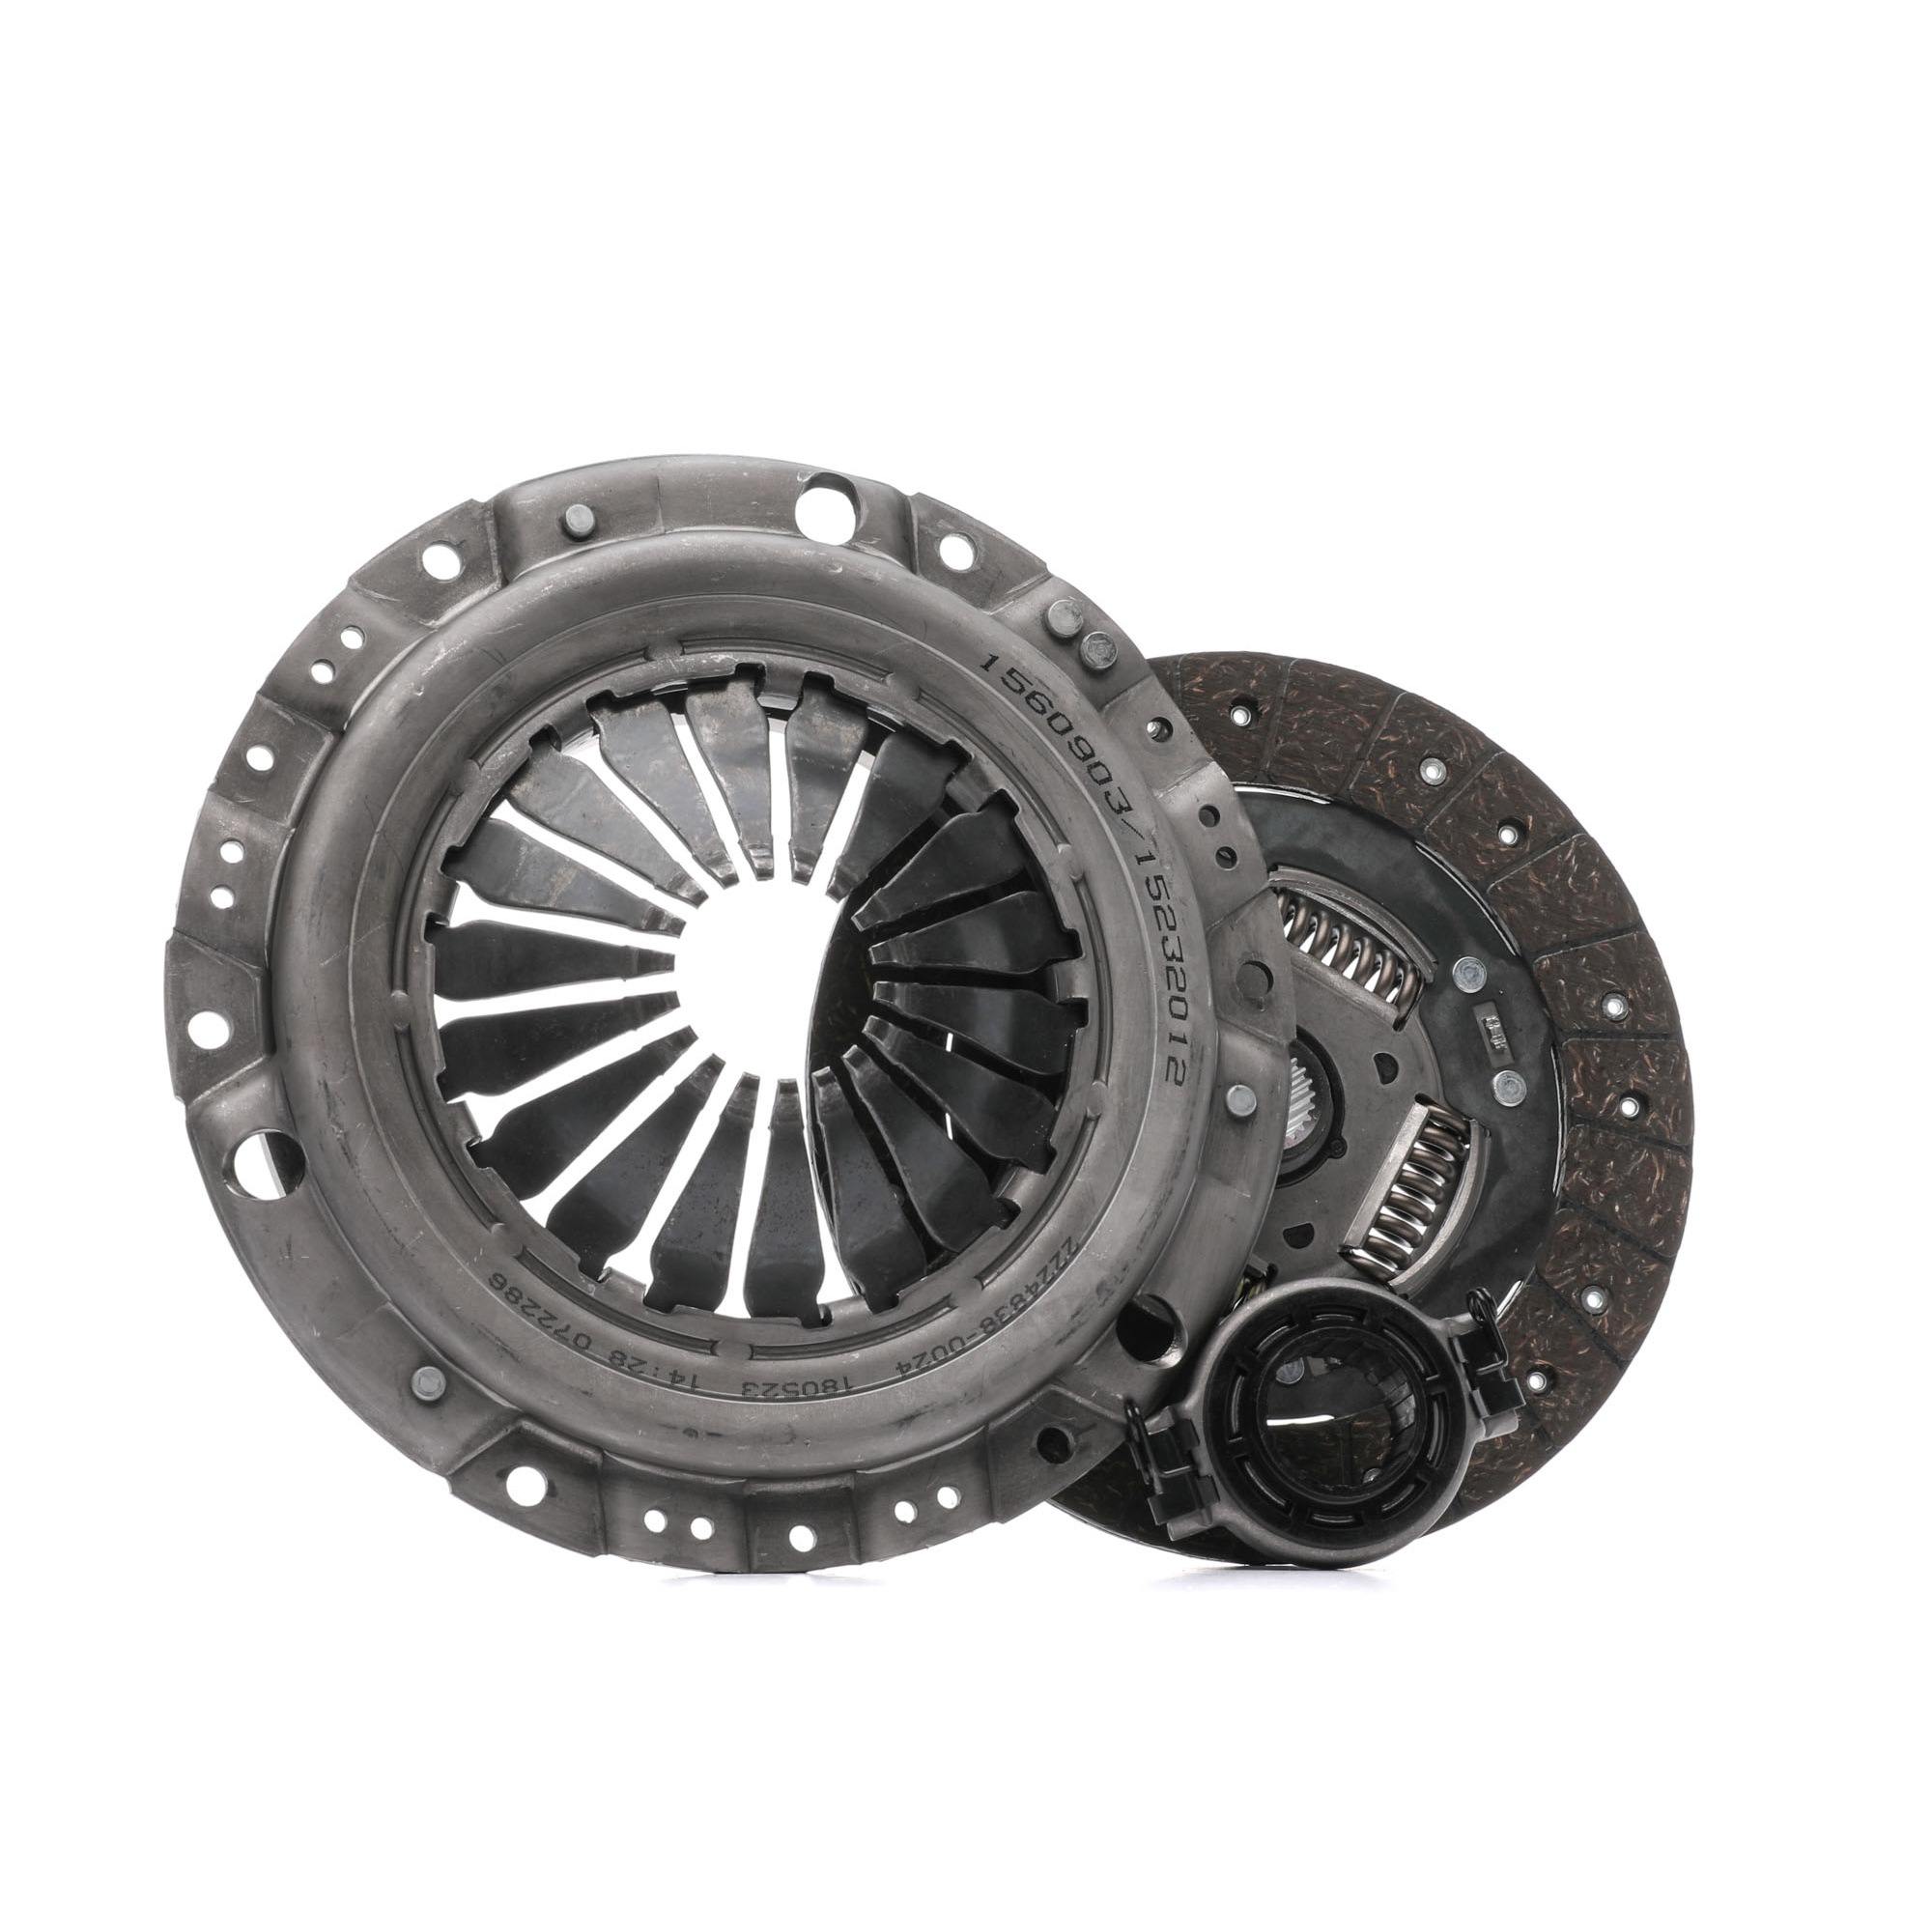 RIDEX 479C0579 Clutch kit with clutch release bearing, with clutch disc, 230mm